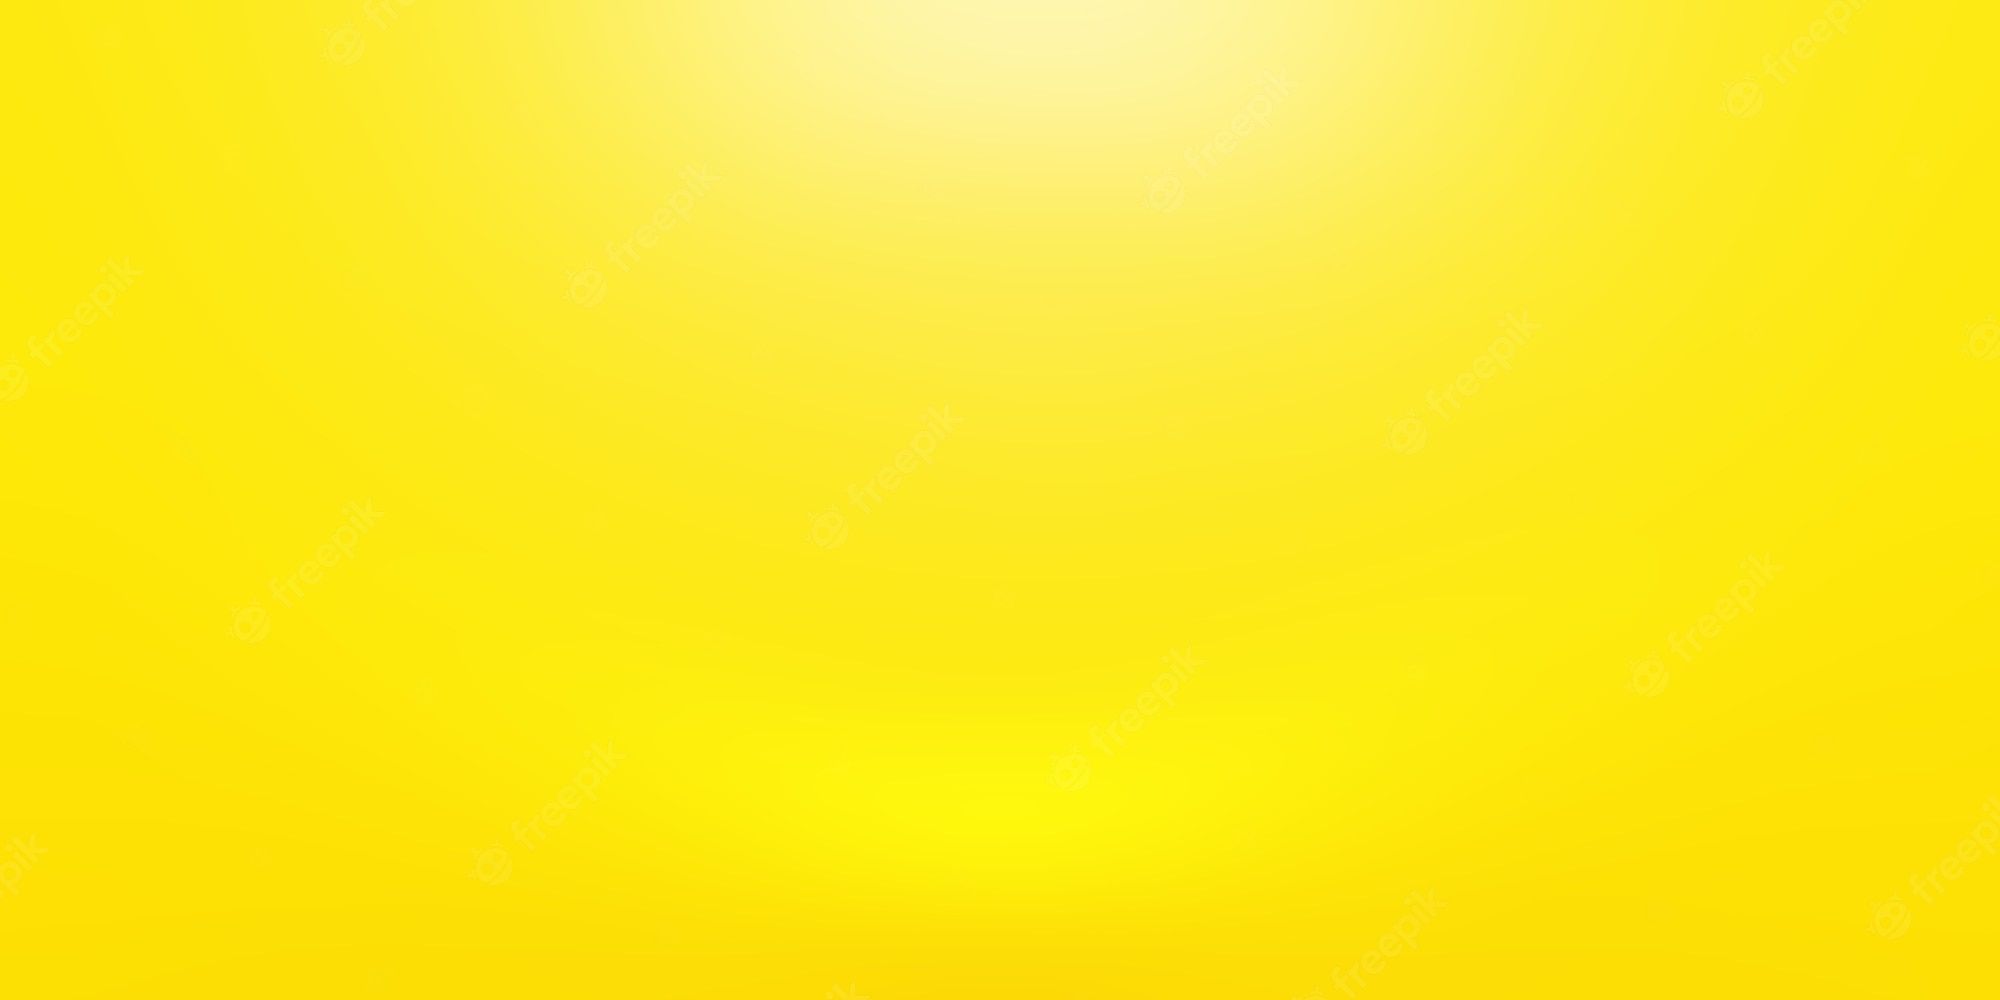 Yellow background with a sun - Yellow